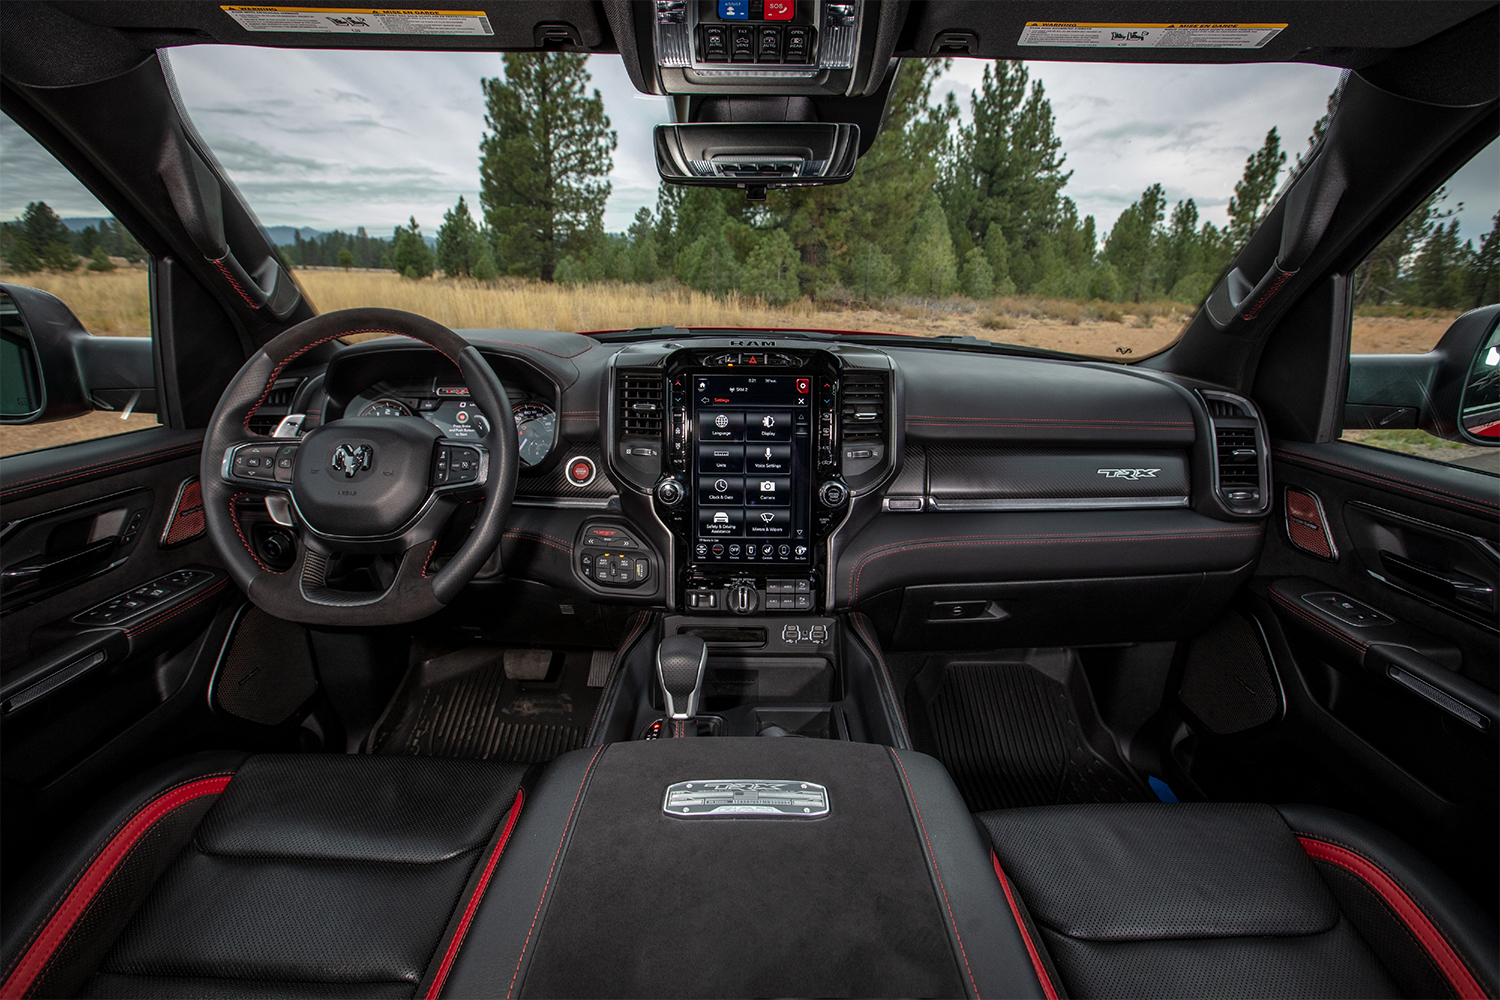 The front two seats in the interior of the 2021 Ram 1500 TRX pickup truck